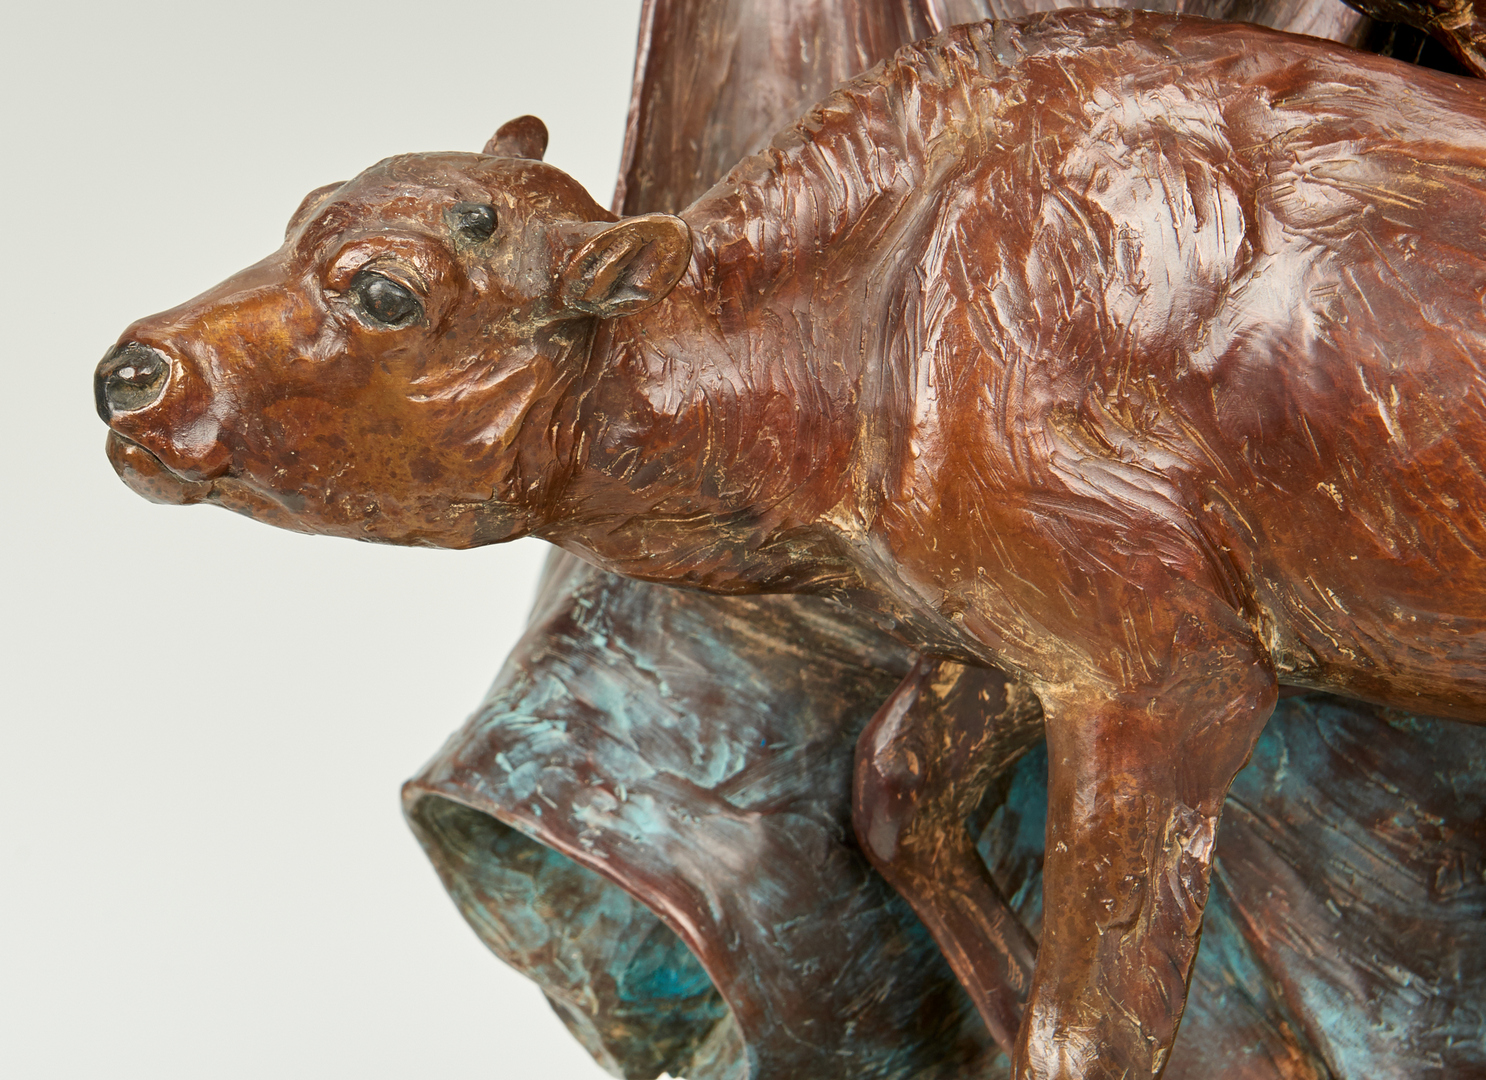 Lot 577: Veryl Goodnight Bronze Sculpture, Back from the Brink